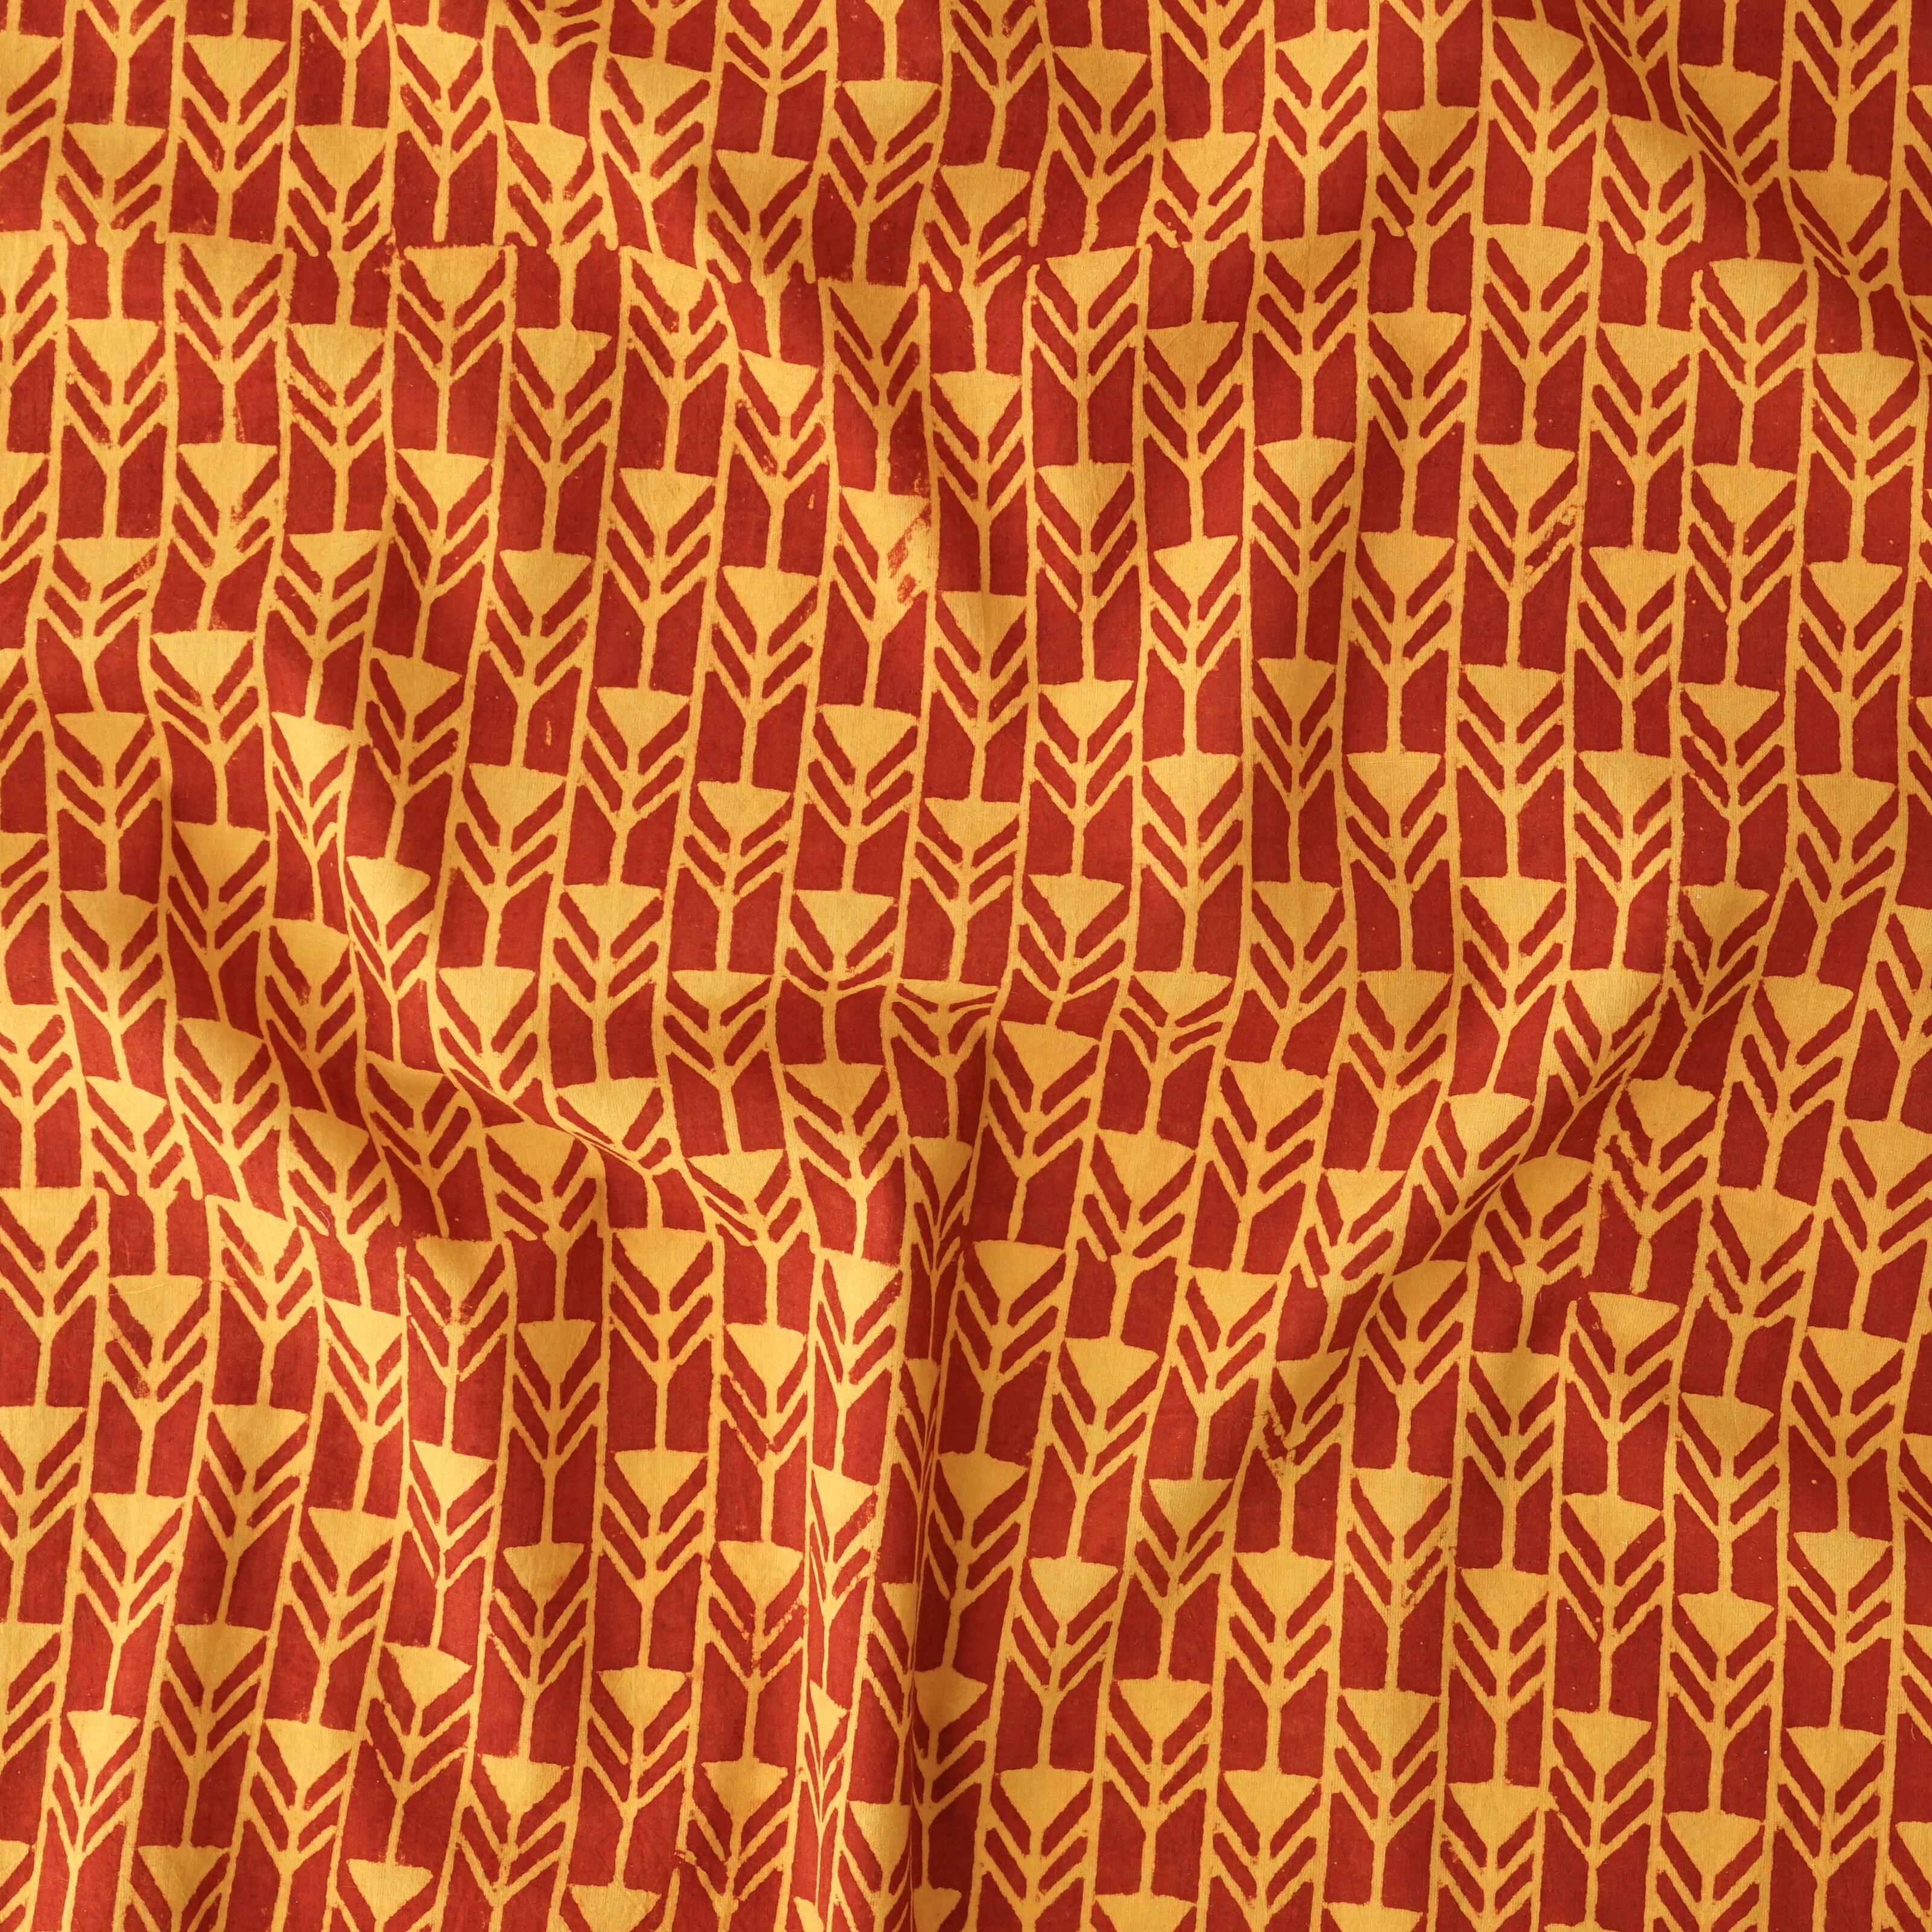 Woodblock-Printed Cotton Fabric - Arrows Print - Dyed in Turmeric & Alizarin - Contrast